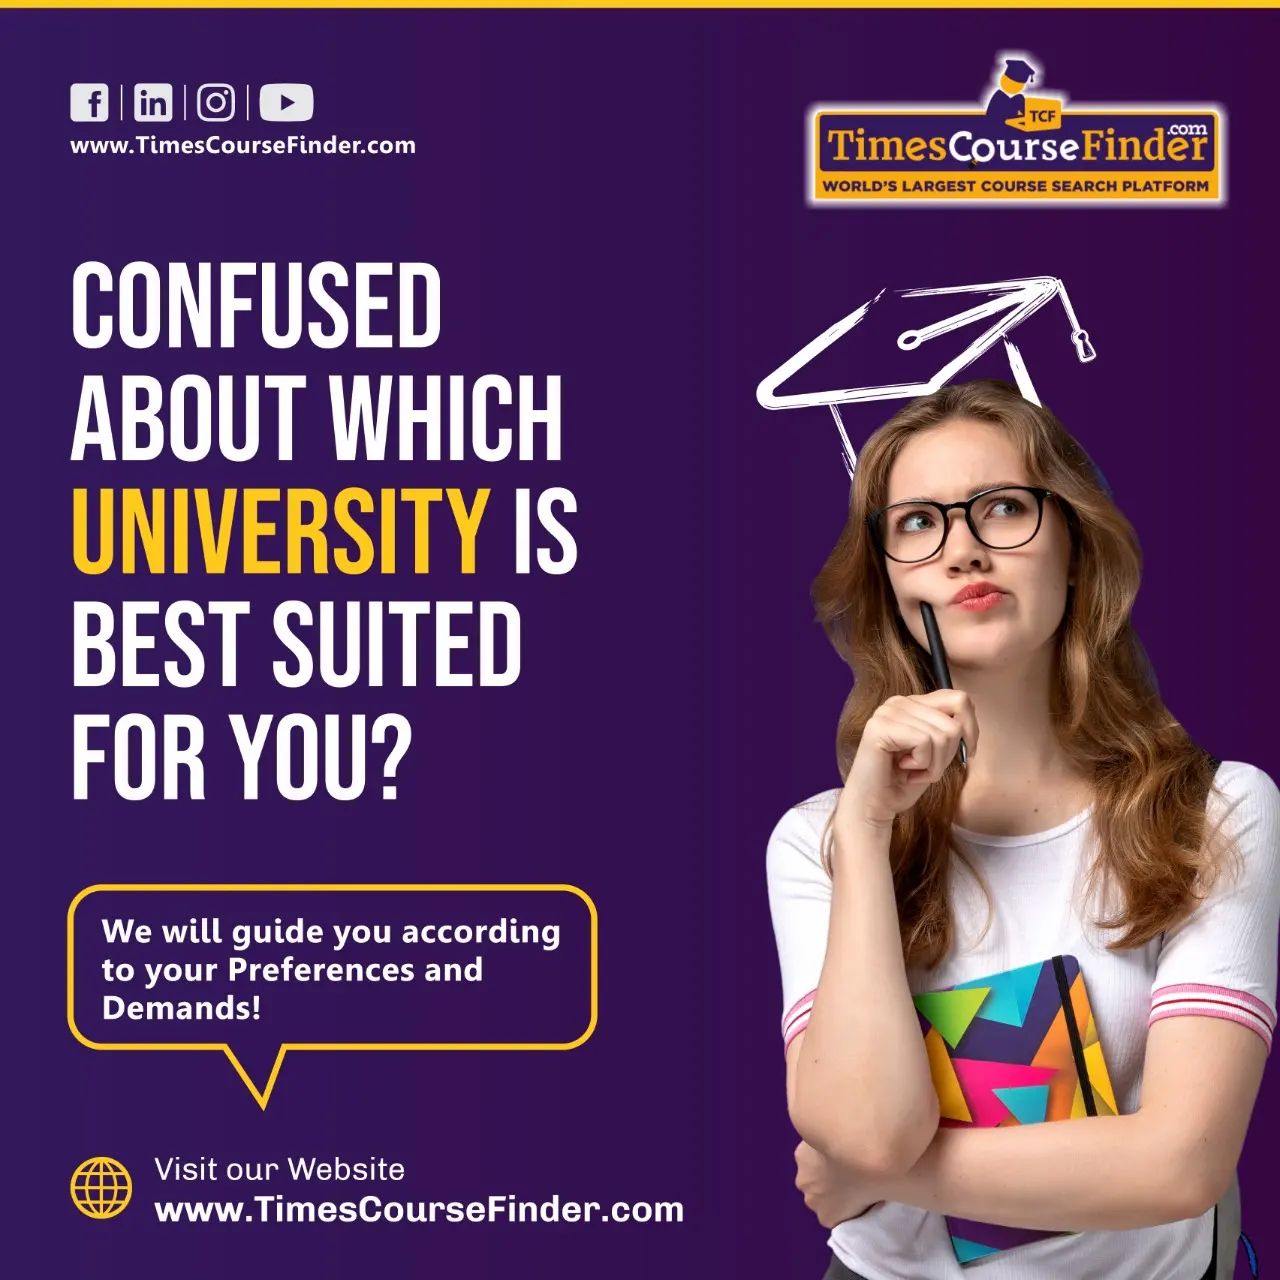 G-JEl TE
www.TimesCourseFinder.com TimesCourseFinder

CONFUSED
LL TH,
UNIVERSITY IS
HR NUE
FOR YOU?

WORLD'S LARGEST COURSE SEARCH PLATFORM

We will guide you according
to your Preferences and

Demands!

 

Visit our Website
www.TimesCourseFinder.com